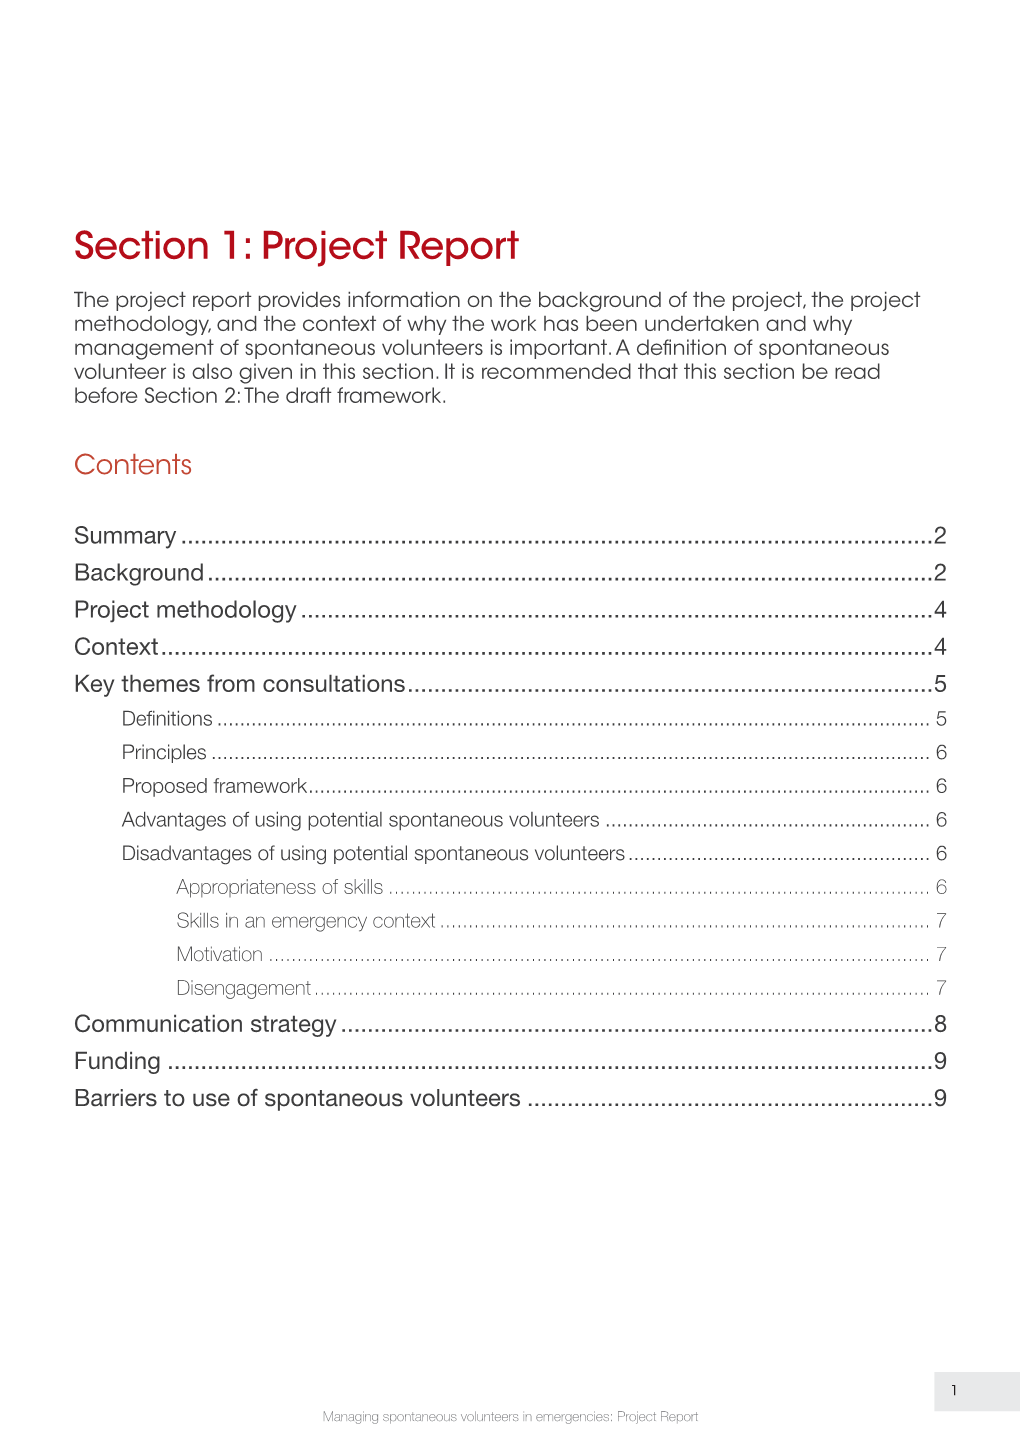 Section 1: Project Report